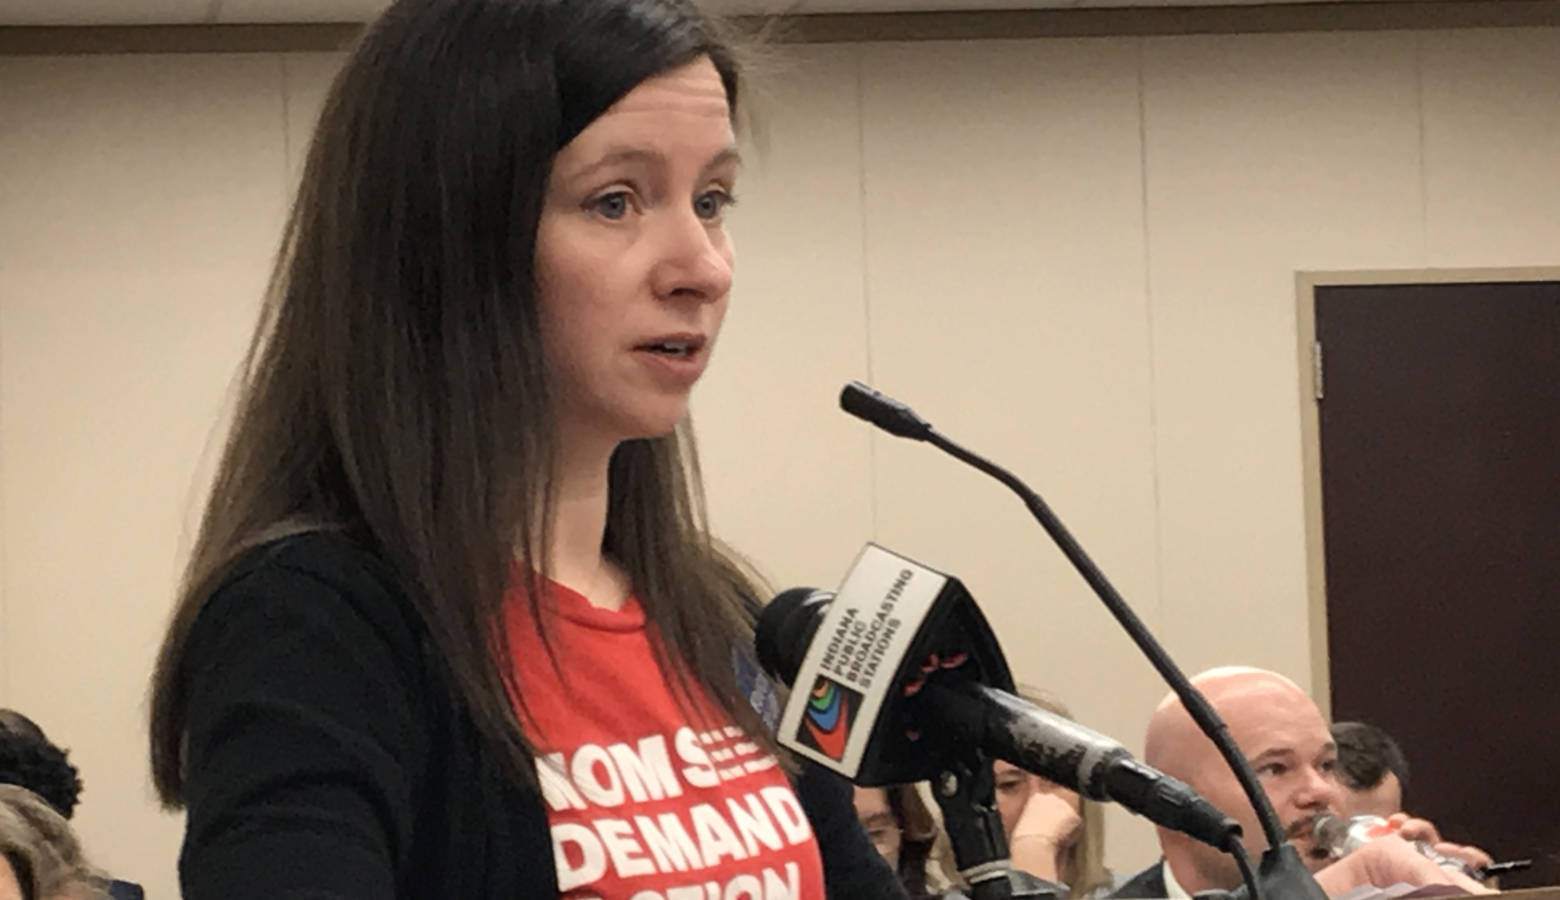 Bloomington resident Courtney Dailey is one of several members of Moms Demand Action who showed up at a House committee to oppose a gun bill. (Brandon Smith/IPB News)